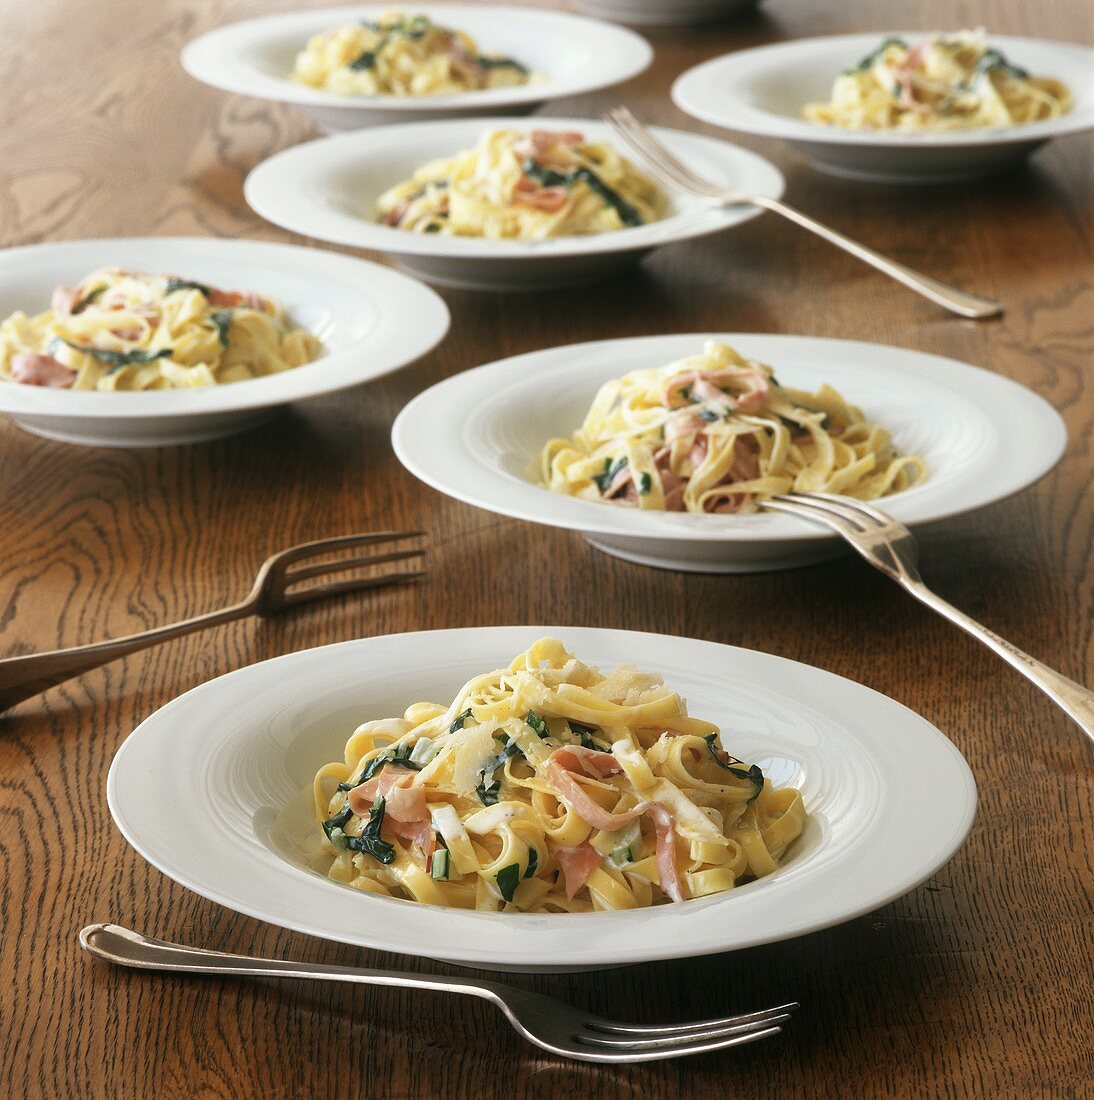 Bowls of Fettucini with Parmesan Cream Sauce, Sliced Ham and Spinach